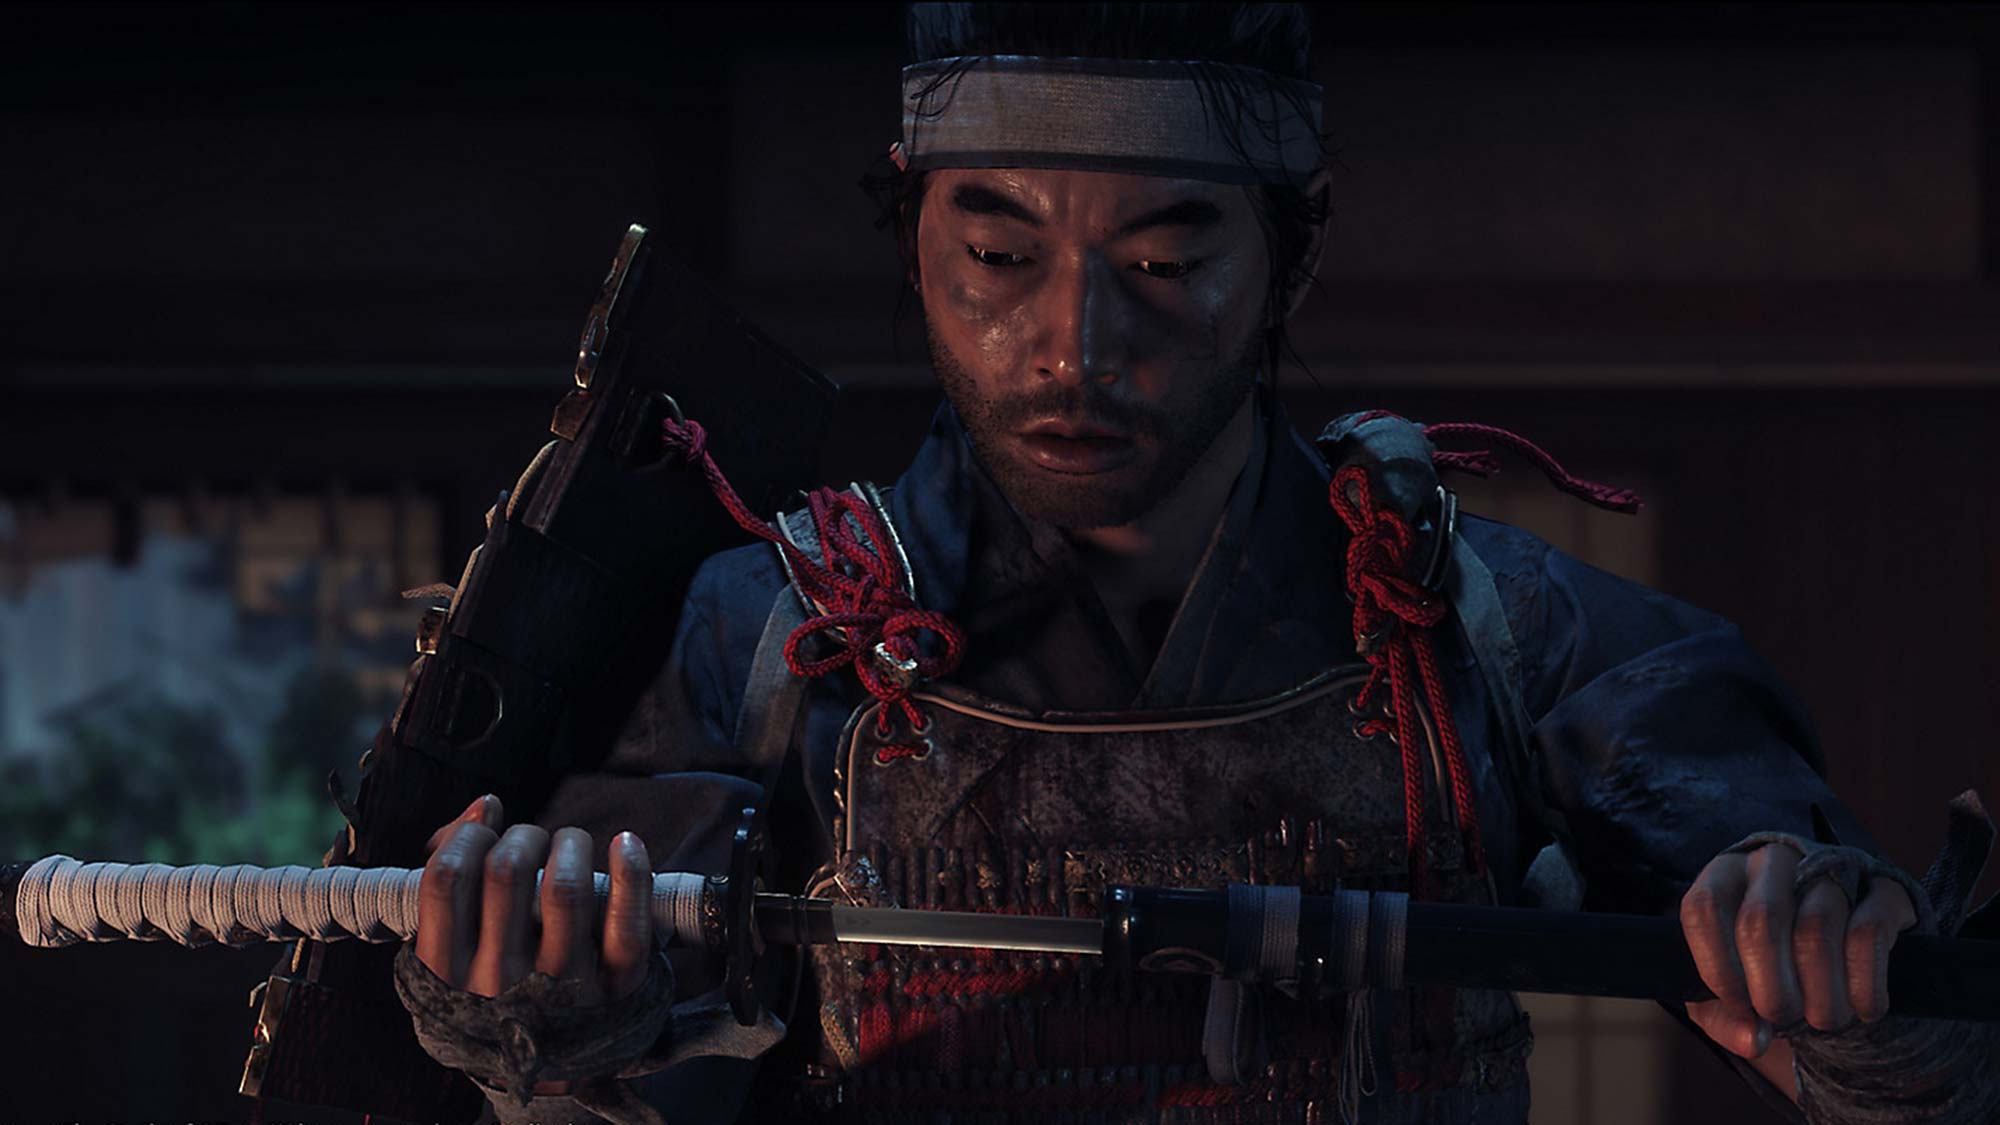 The Best Game Music of 2020 - Ghost of Tsushima